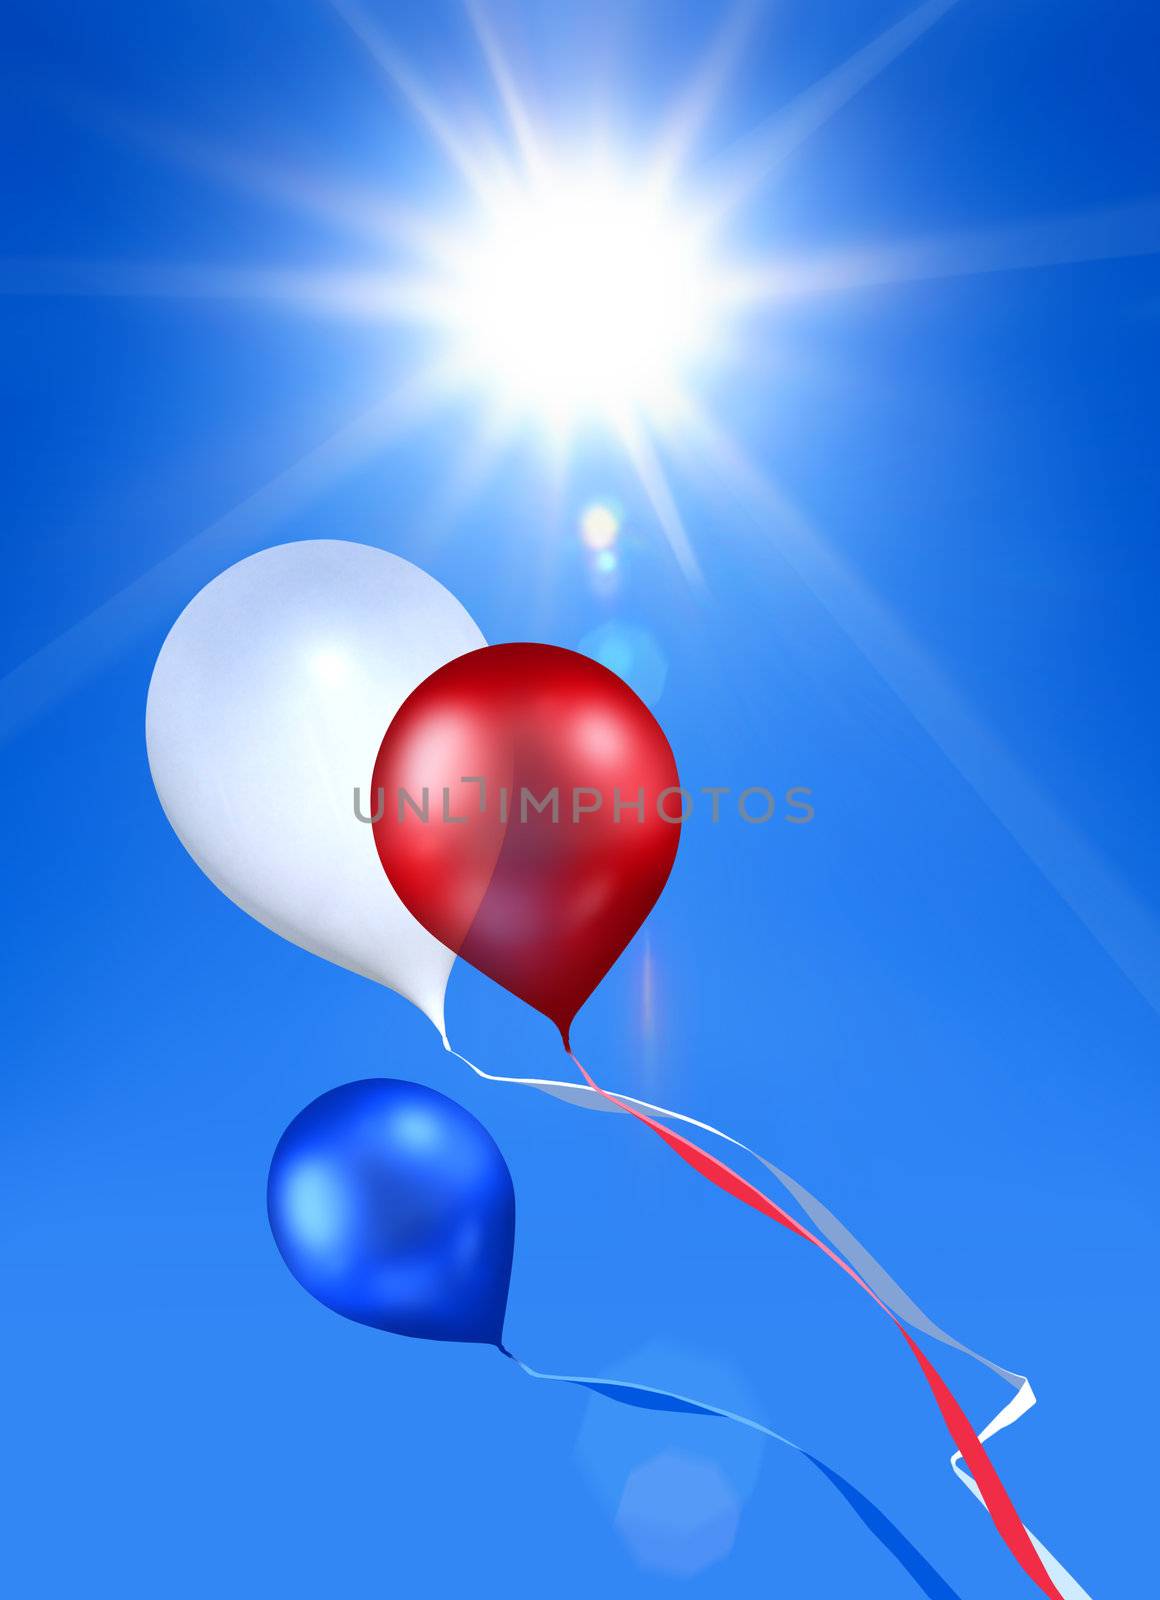 toy balloon soaring in the blue sky under shining sun